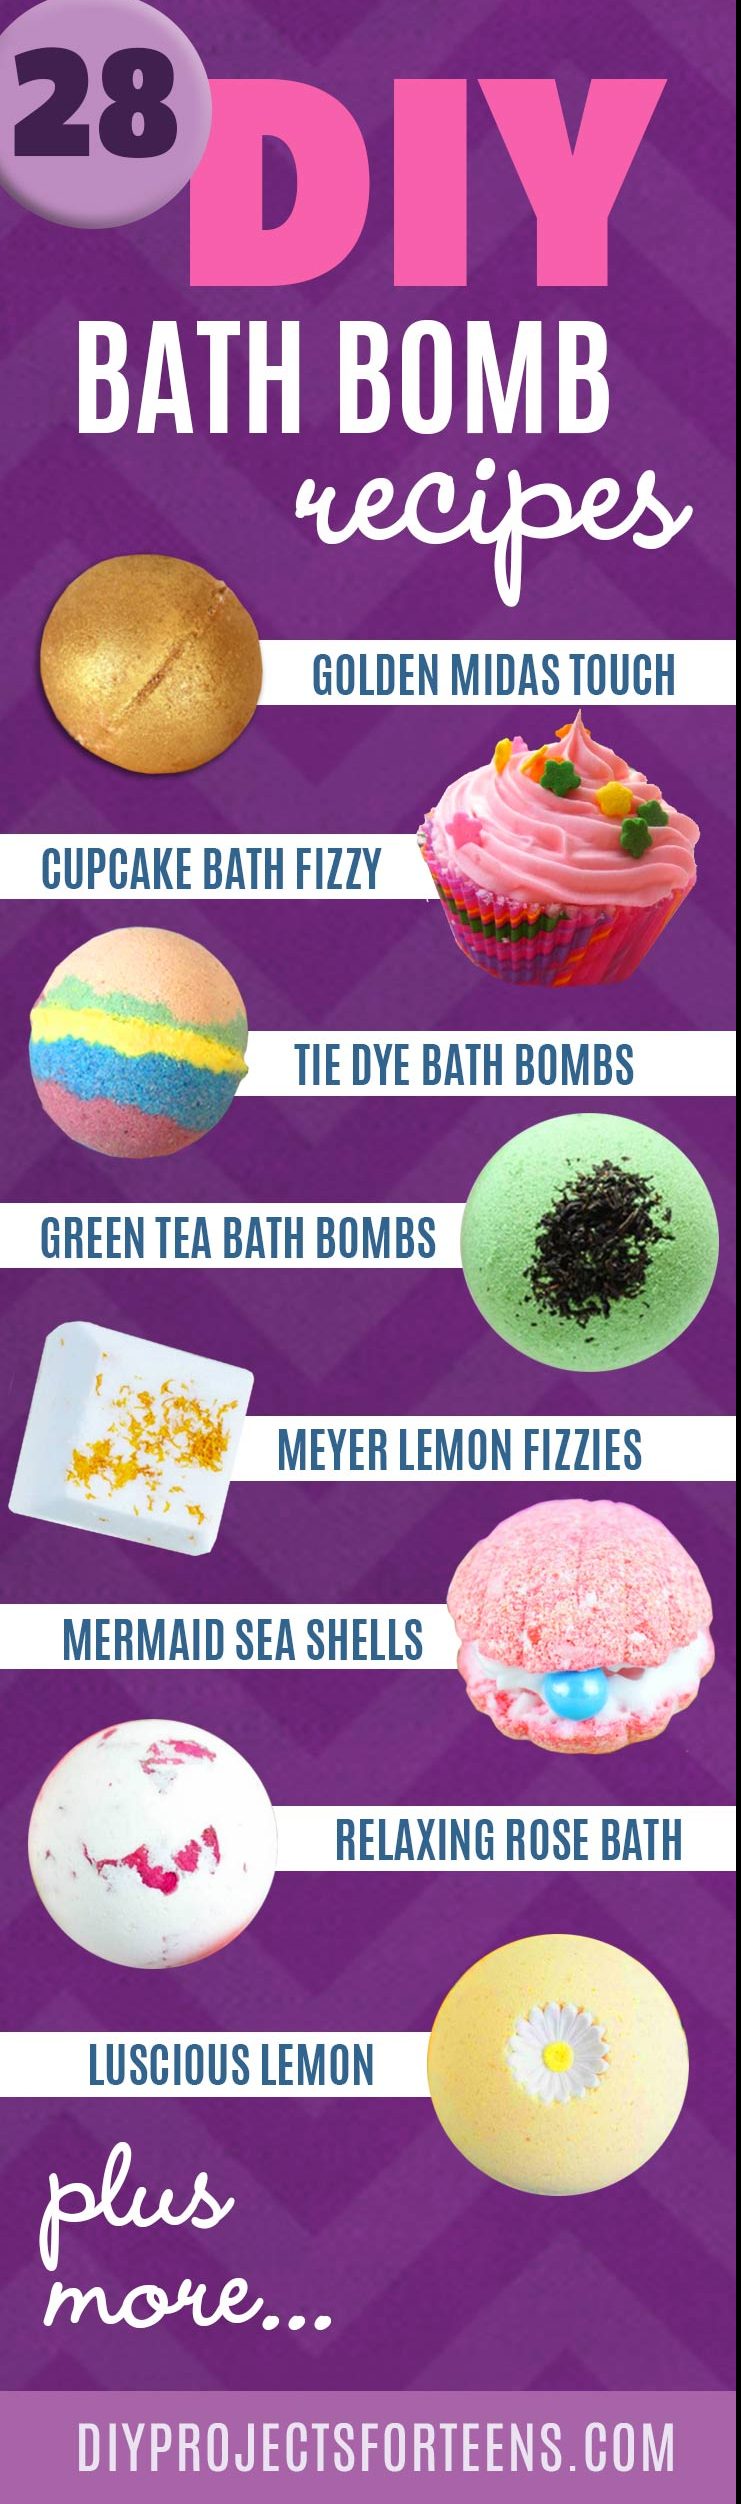 Homemade DIY Bath Bombs | Bath Bombs Tutorial Like Lush - Recipes for 28 Awesome Bathbombs | Pretty and Cheap DIY Gifts | DIY Projects and Crafts by DIY JOY